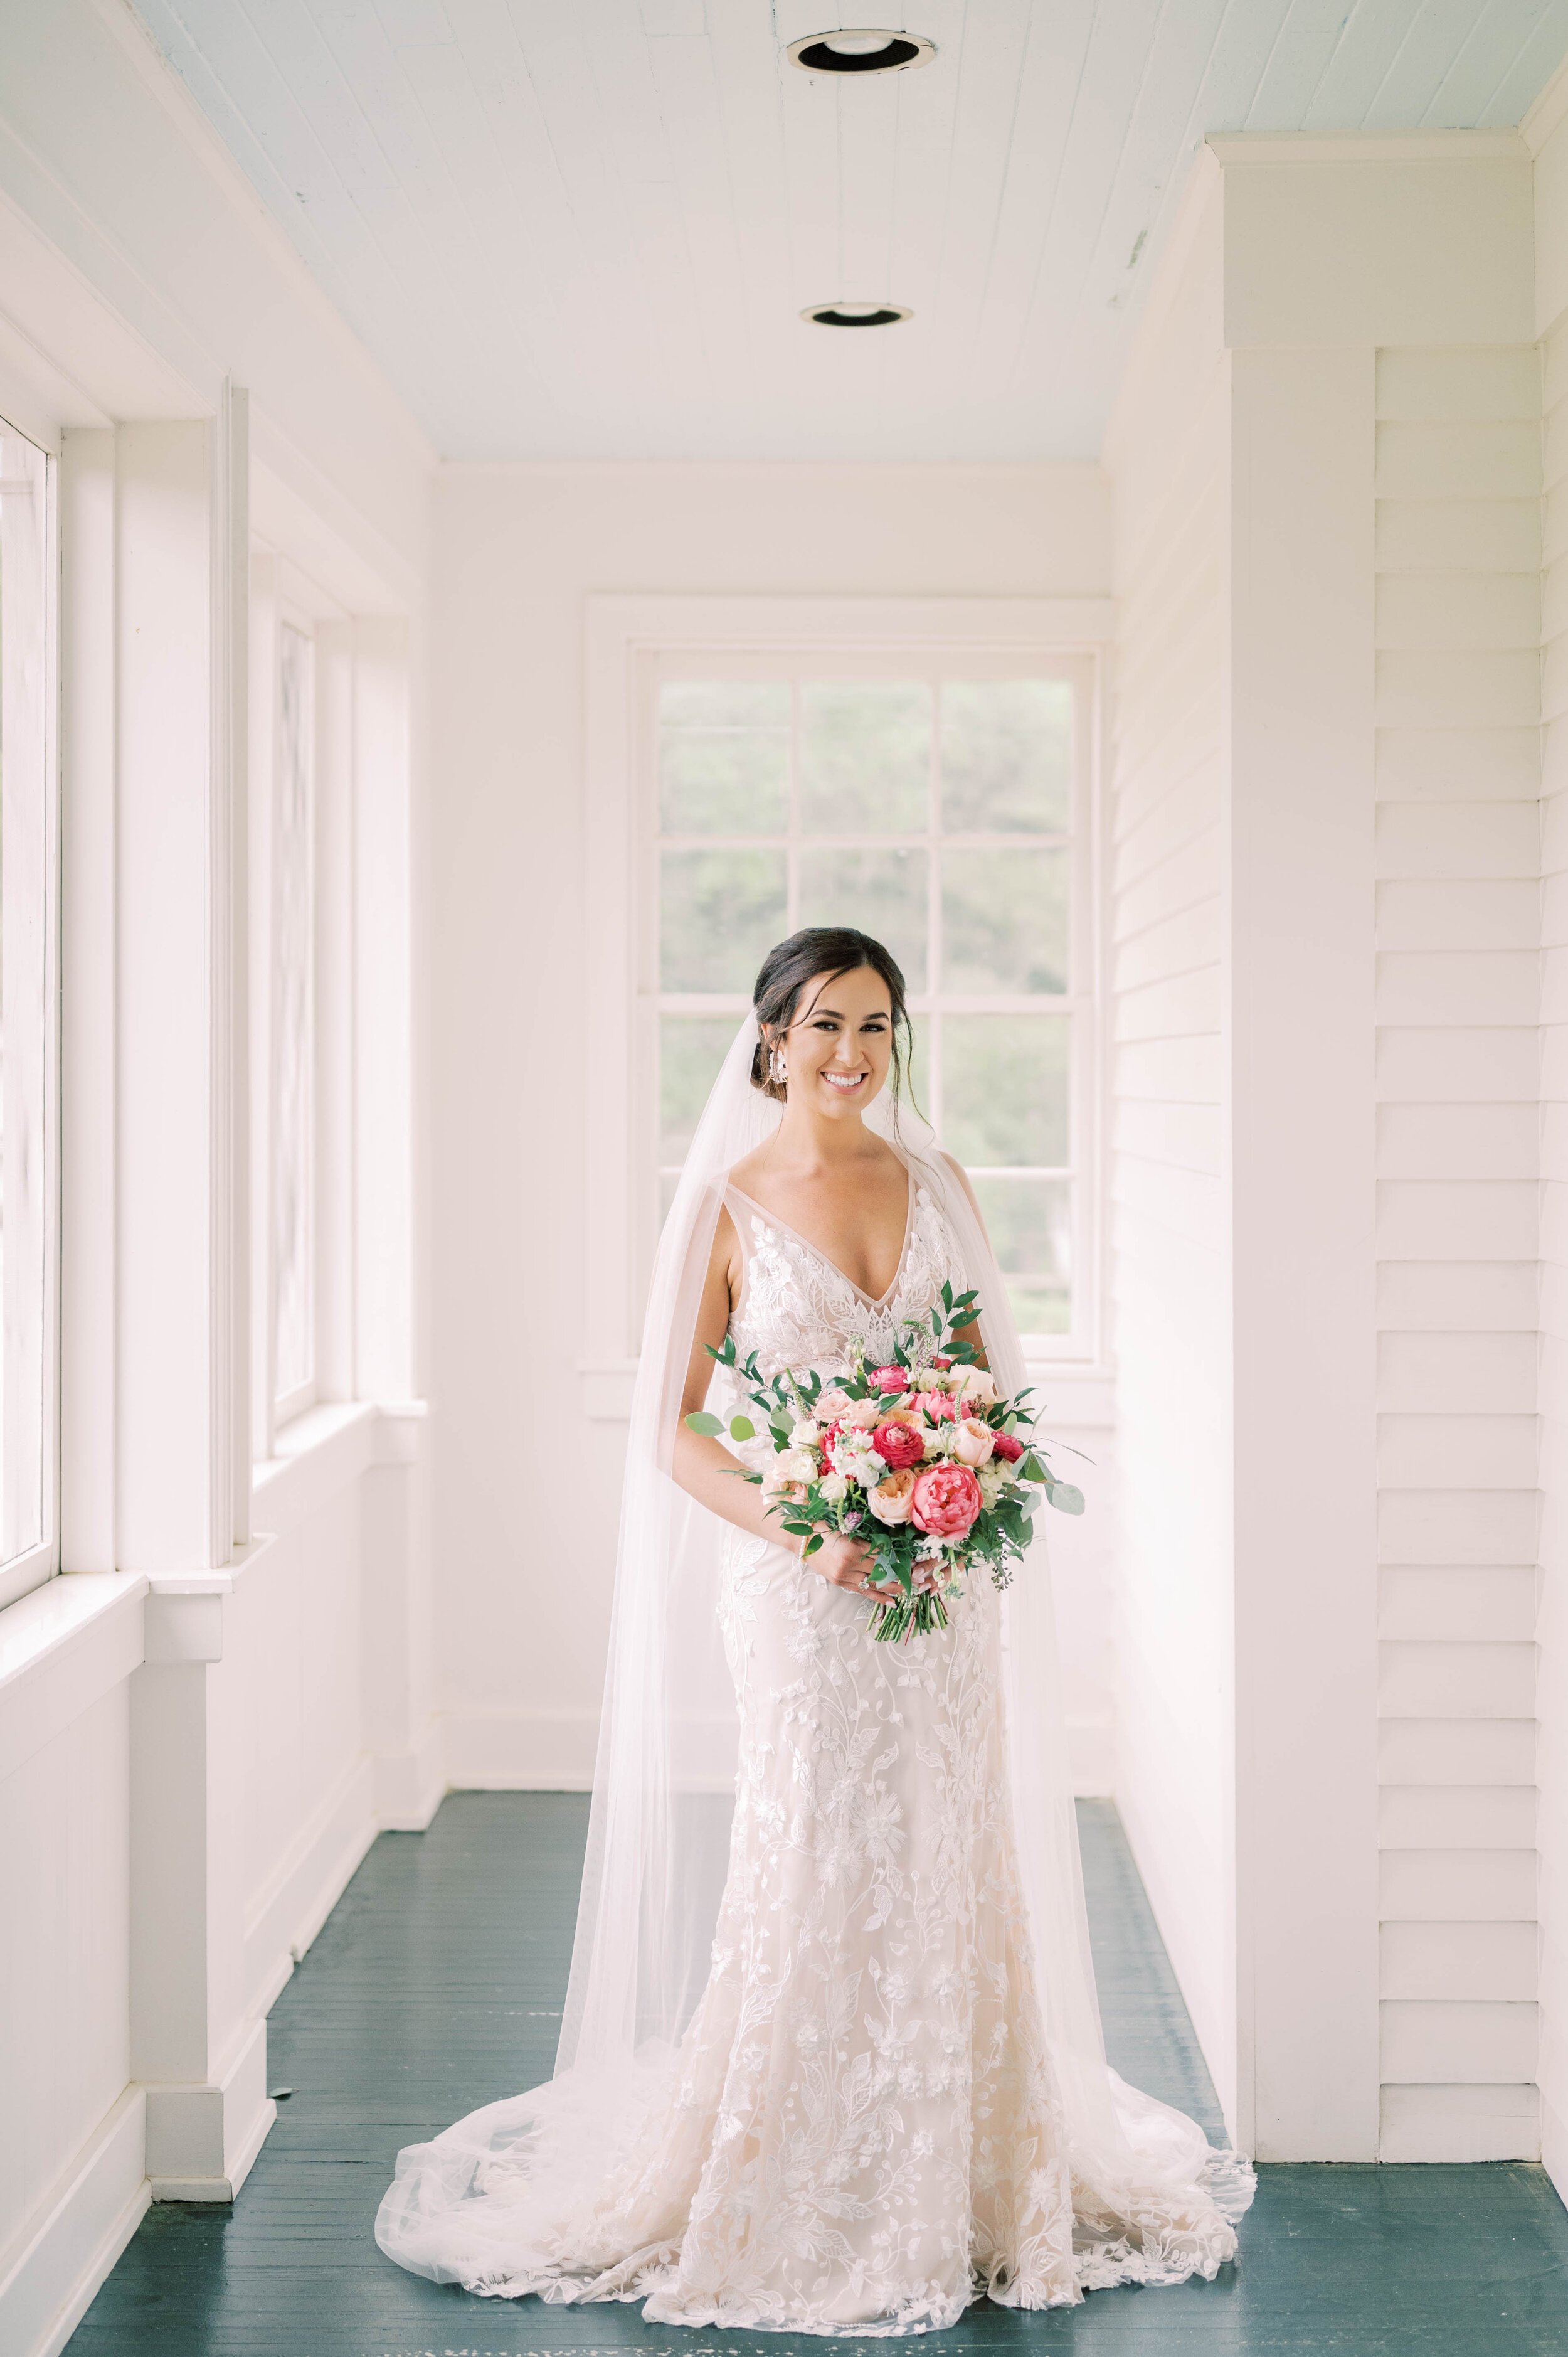 ivory-and-beau-blog-wedding-blog-ivory-and-beau-bride-madison-down-for-the-gown-made-with-love-wedding-dress-bridal-gown-wedding-gown-real-bride-real-wedding-bridal-shop-savannah-georgia-21Madison.Blake-179.jpg